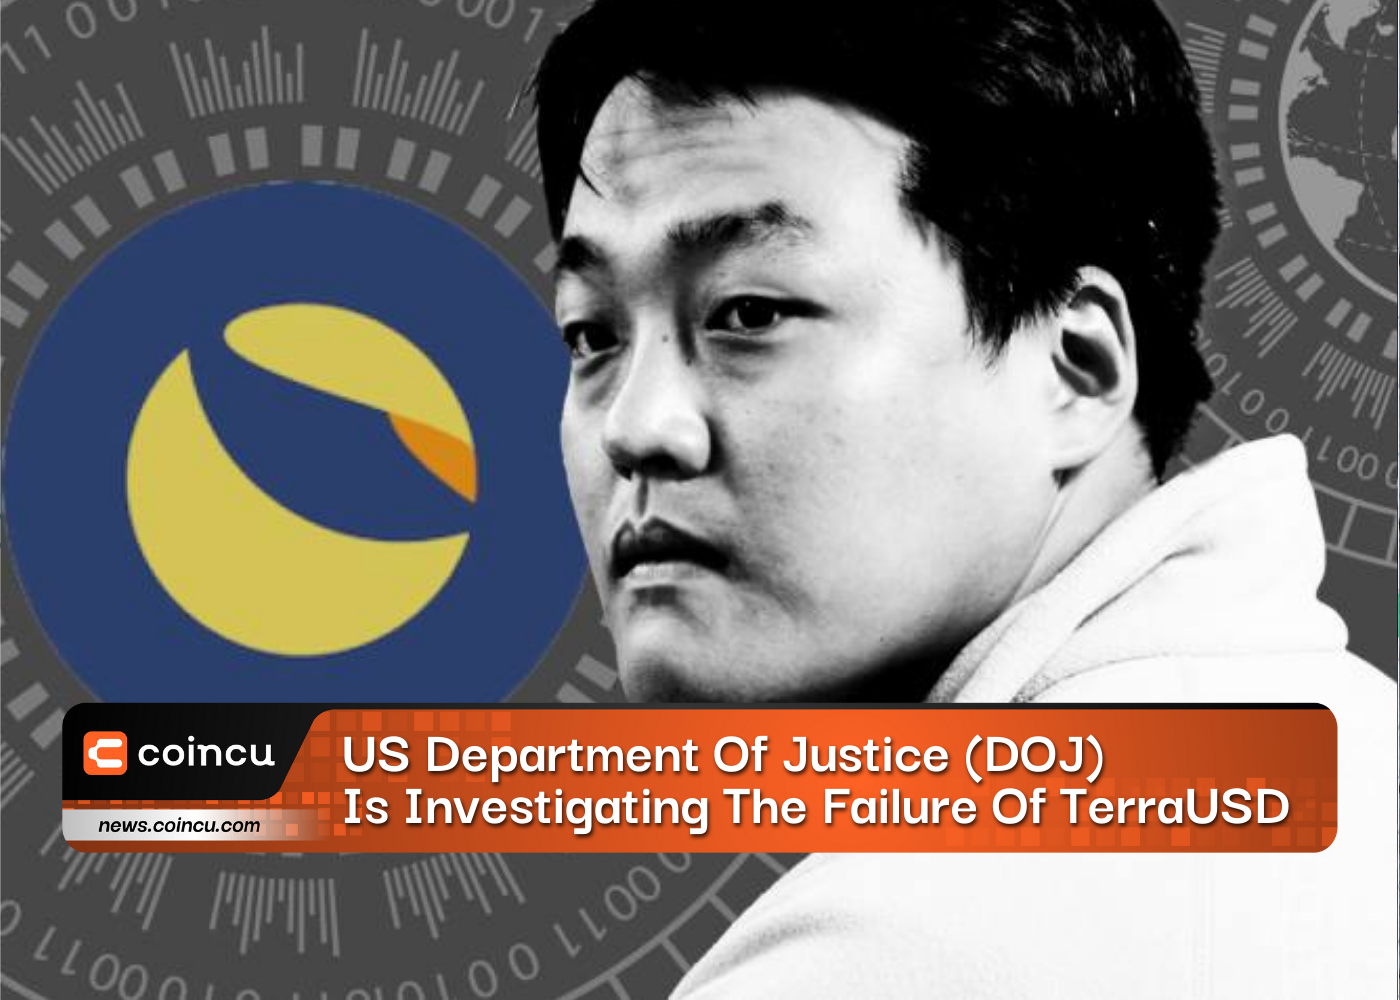 US Department Of Justice (DOJ) Is Investigating The Failure Of TerraUSD